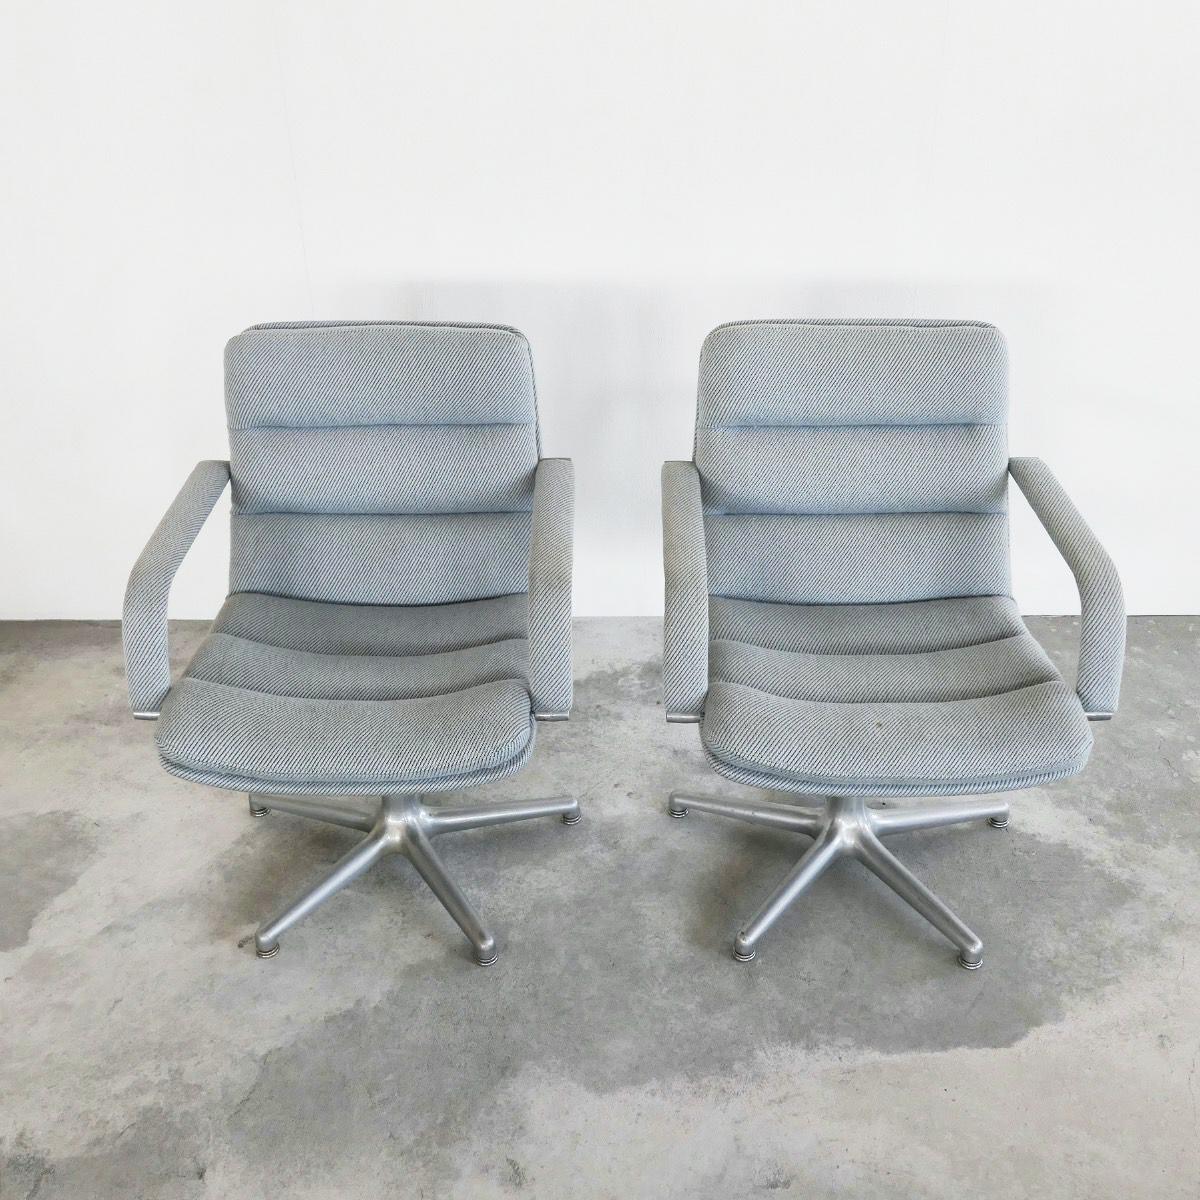 Mid-Century Modern Geoffrey Harcourt Pair of Swivel Armchairs in Wool for Artifort 1970s For Sale